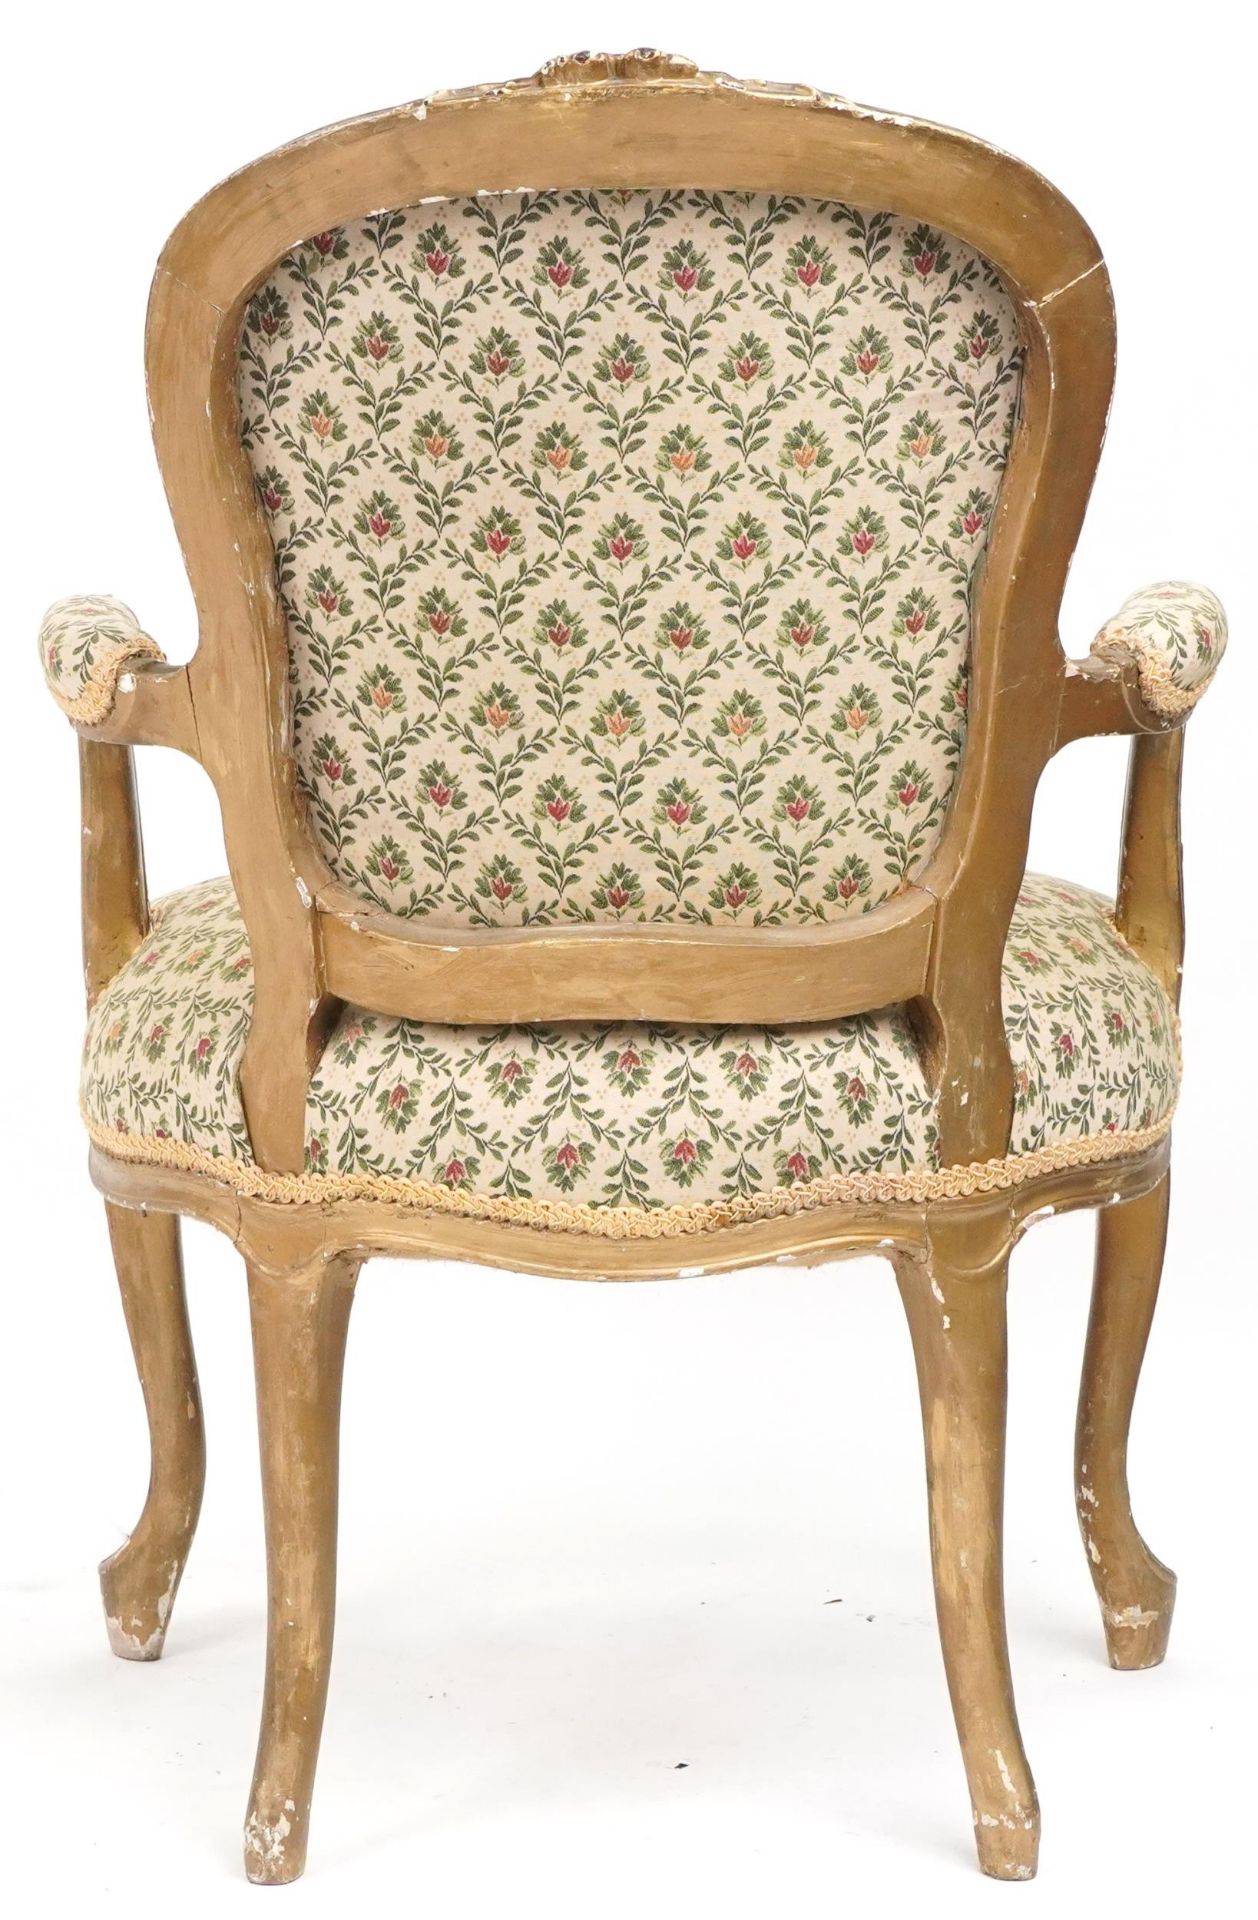 French gilt framed elbow chair with floral upholstery, 99cm high - Image 4 of 4